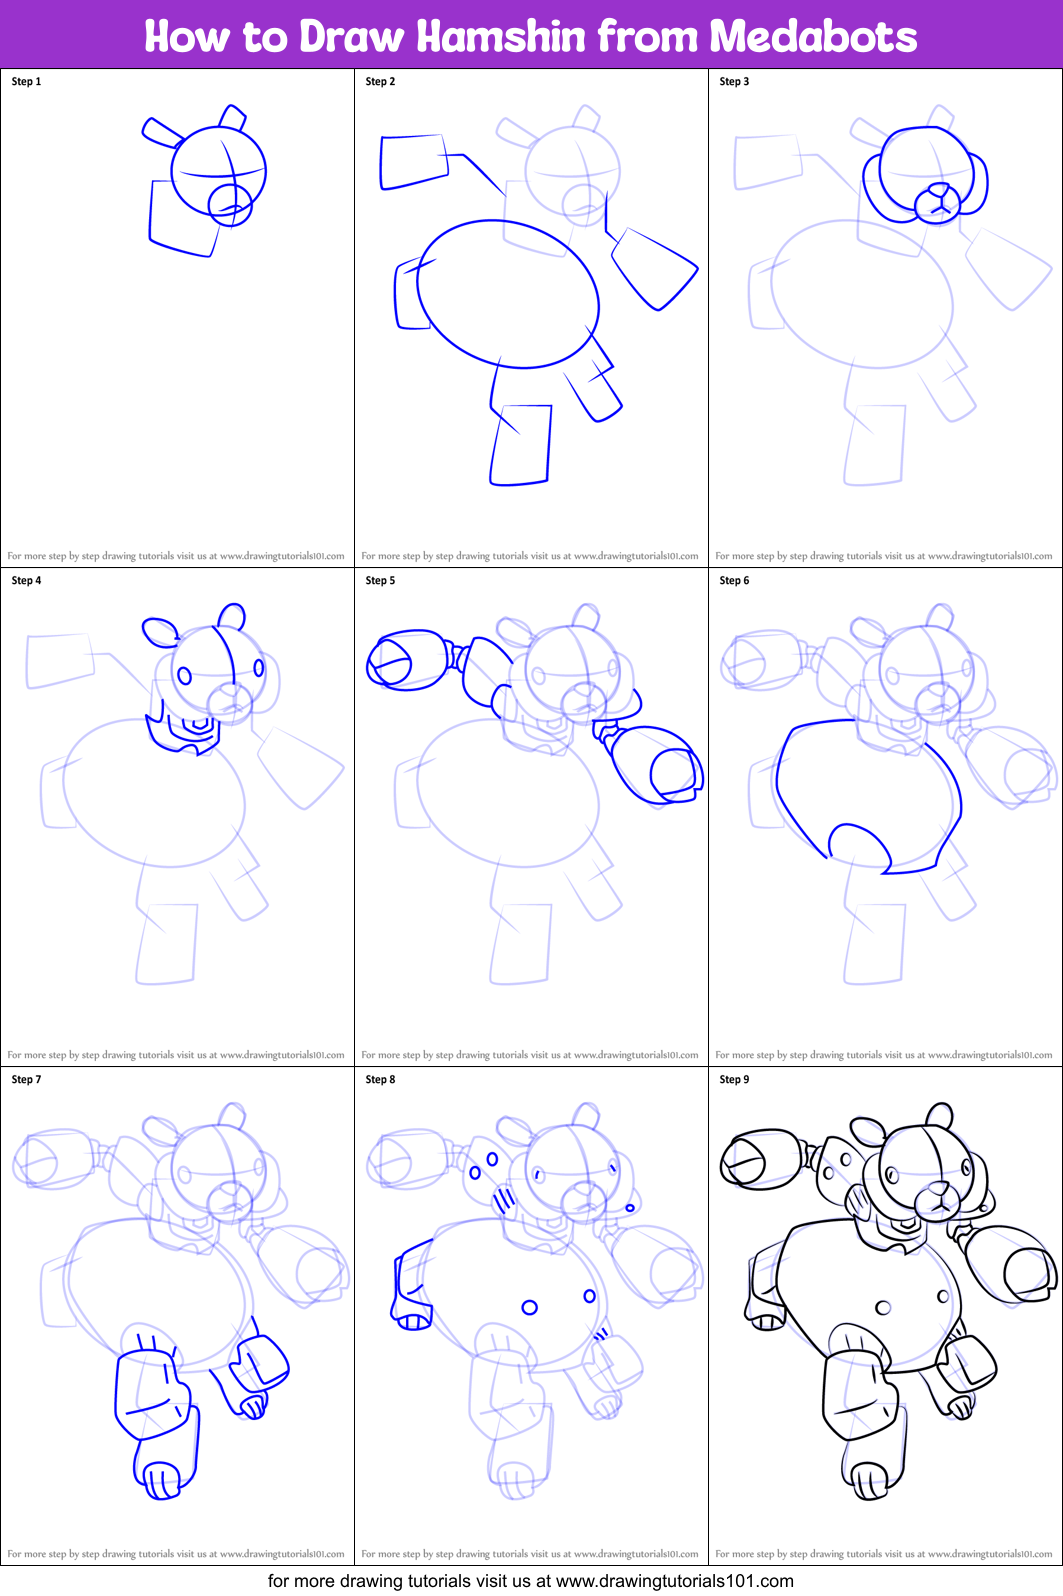 How to Draw Hamshin from Medabots (Medabots) Step by Step ...